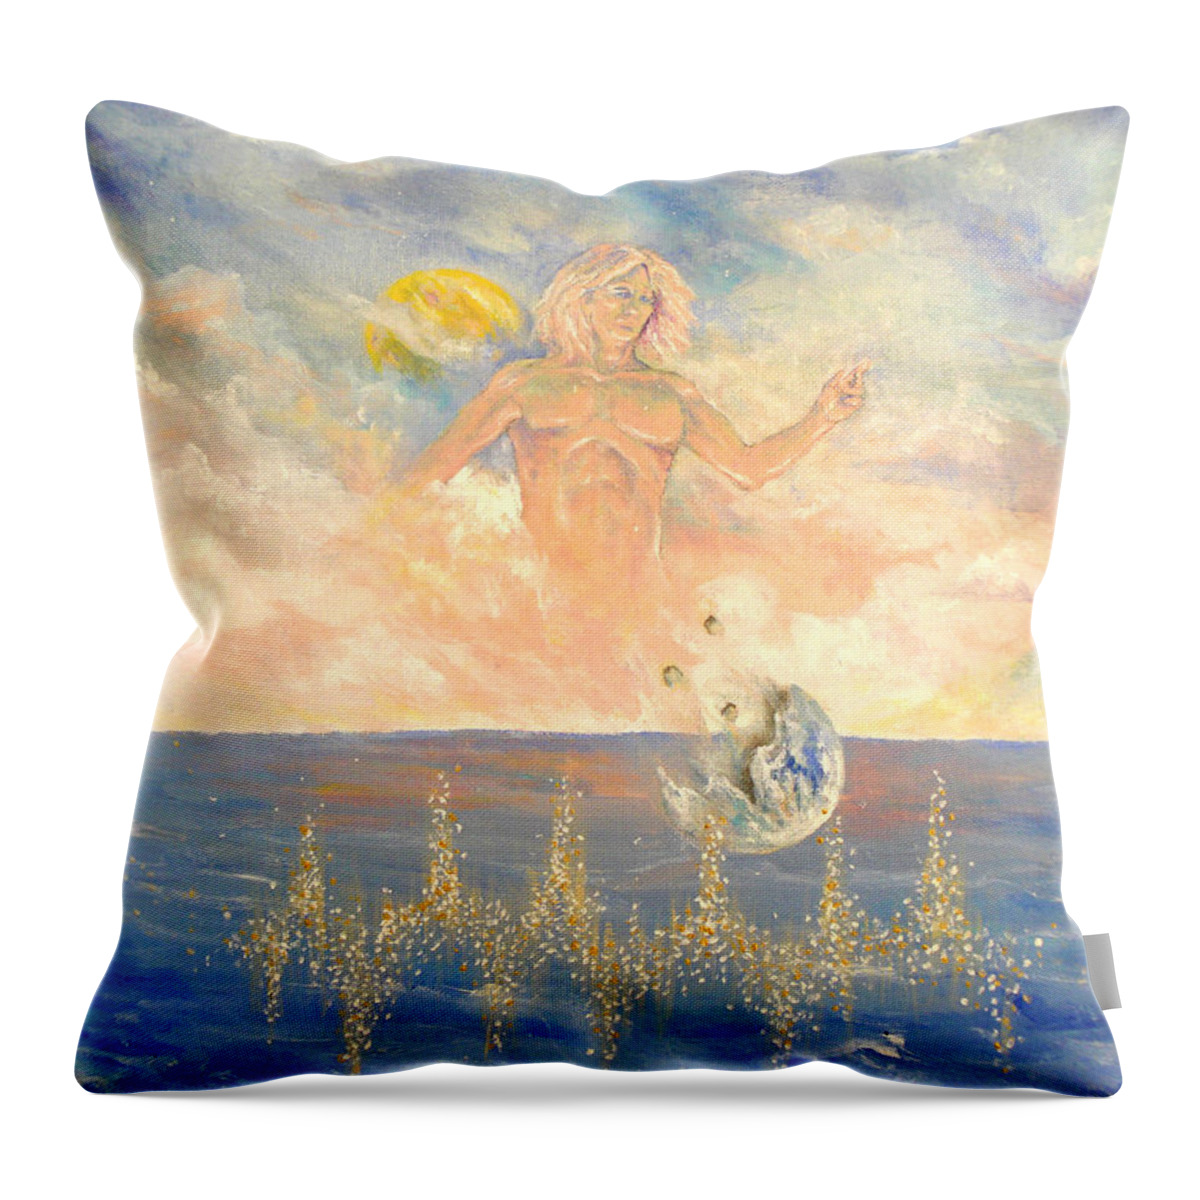 Planet Throw Pillow featuring the painting Planet Hunter by James Andrews